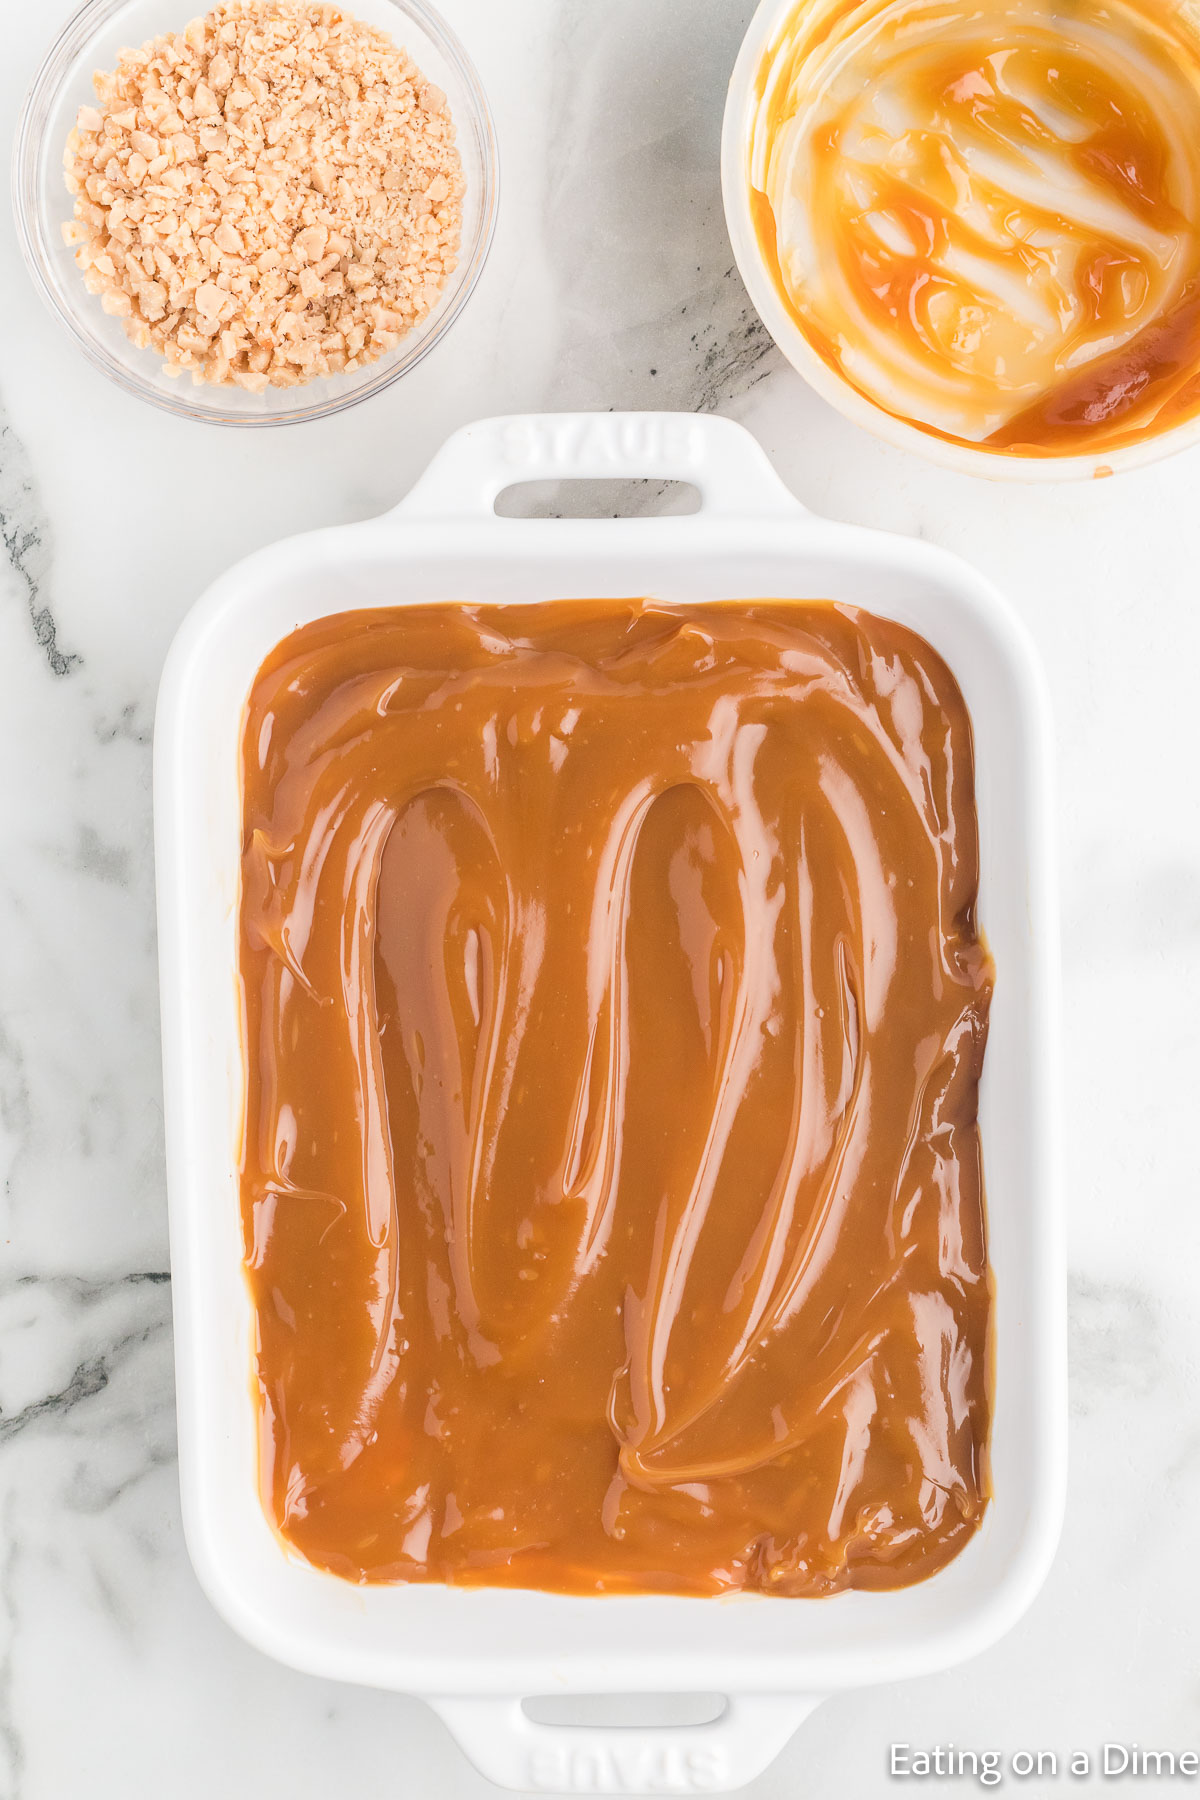 Topping the cream cheese mixture with the caramel sauce